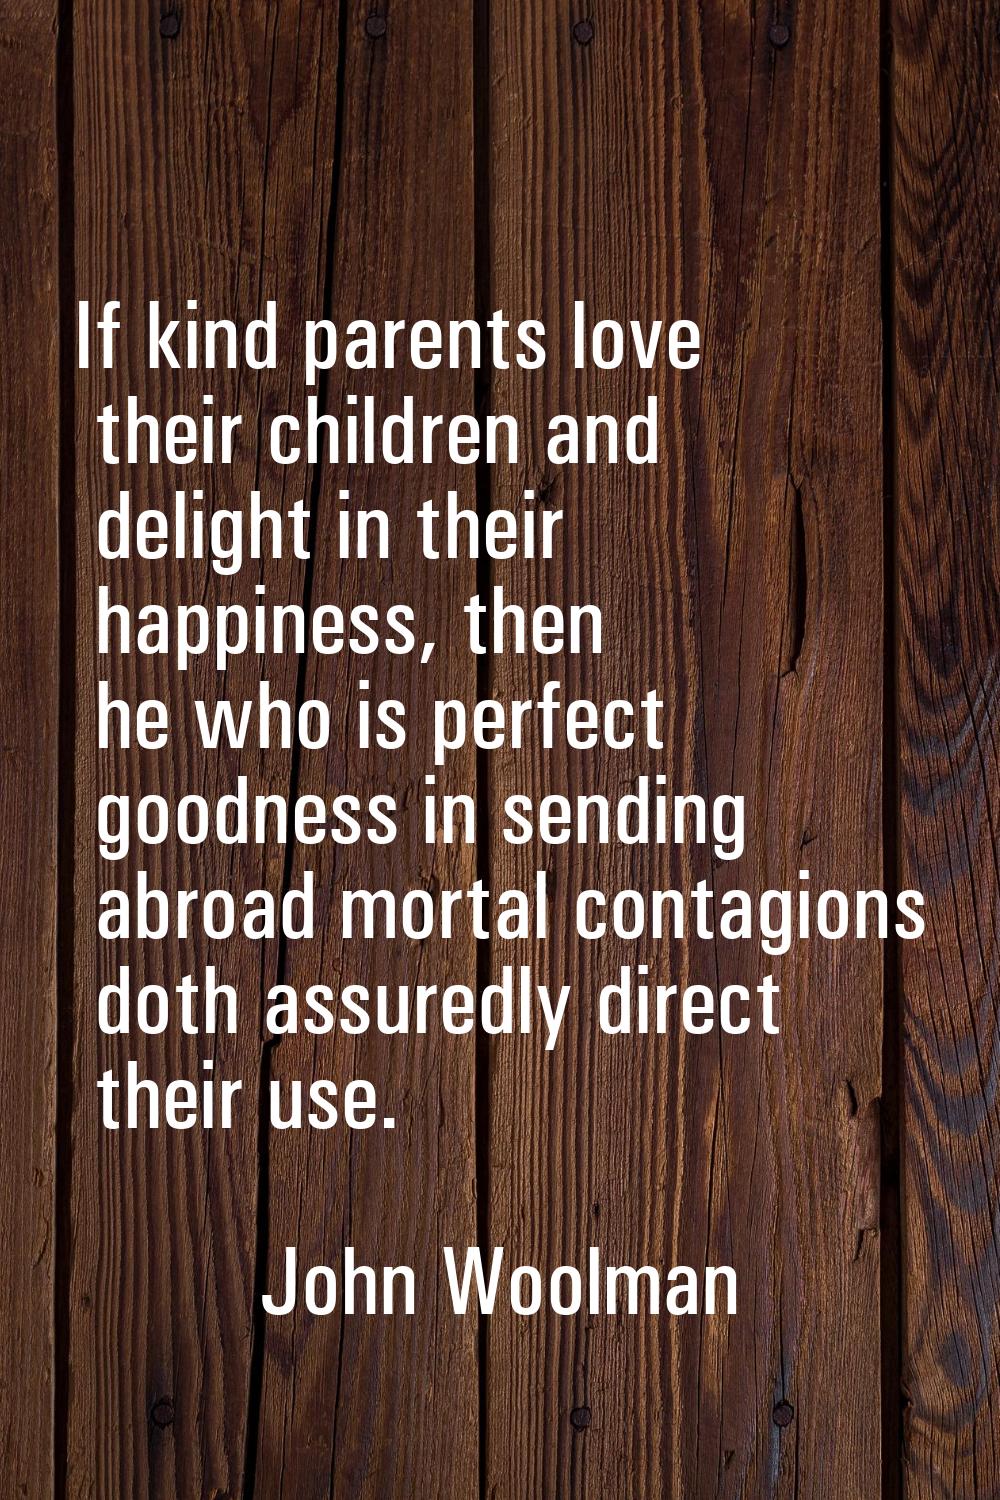 If kind parents love their children and delight in their happiness, then he who is perfect goodness